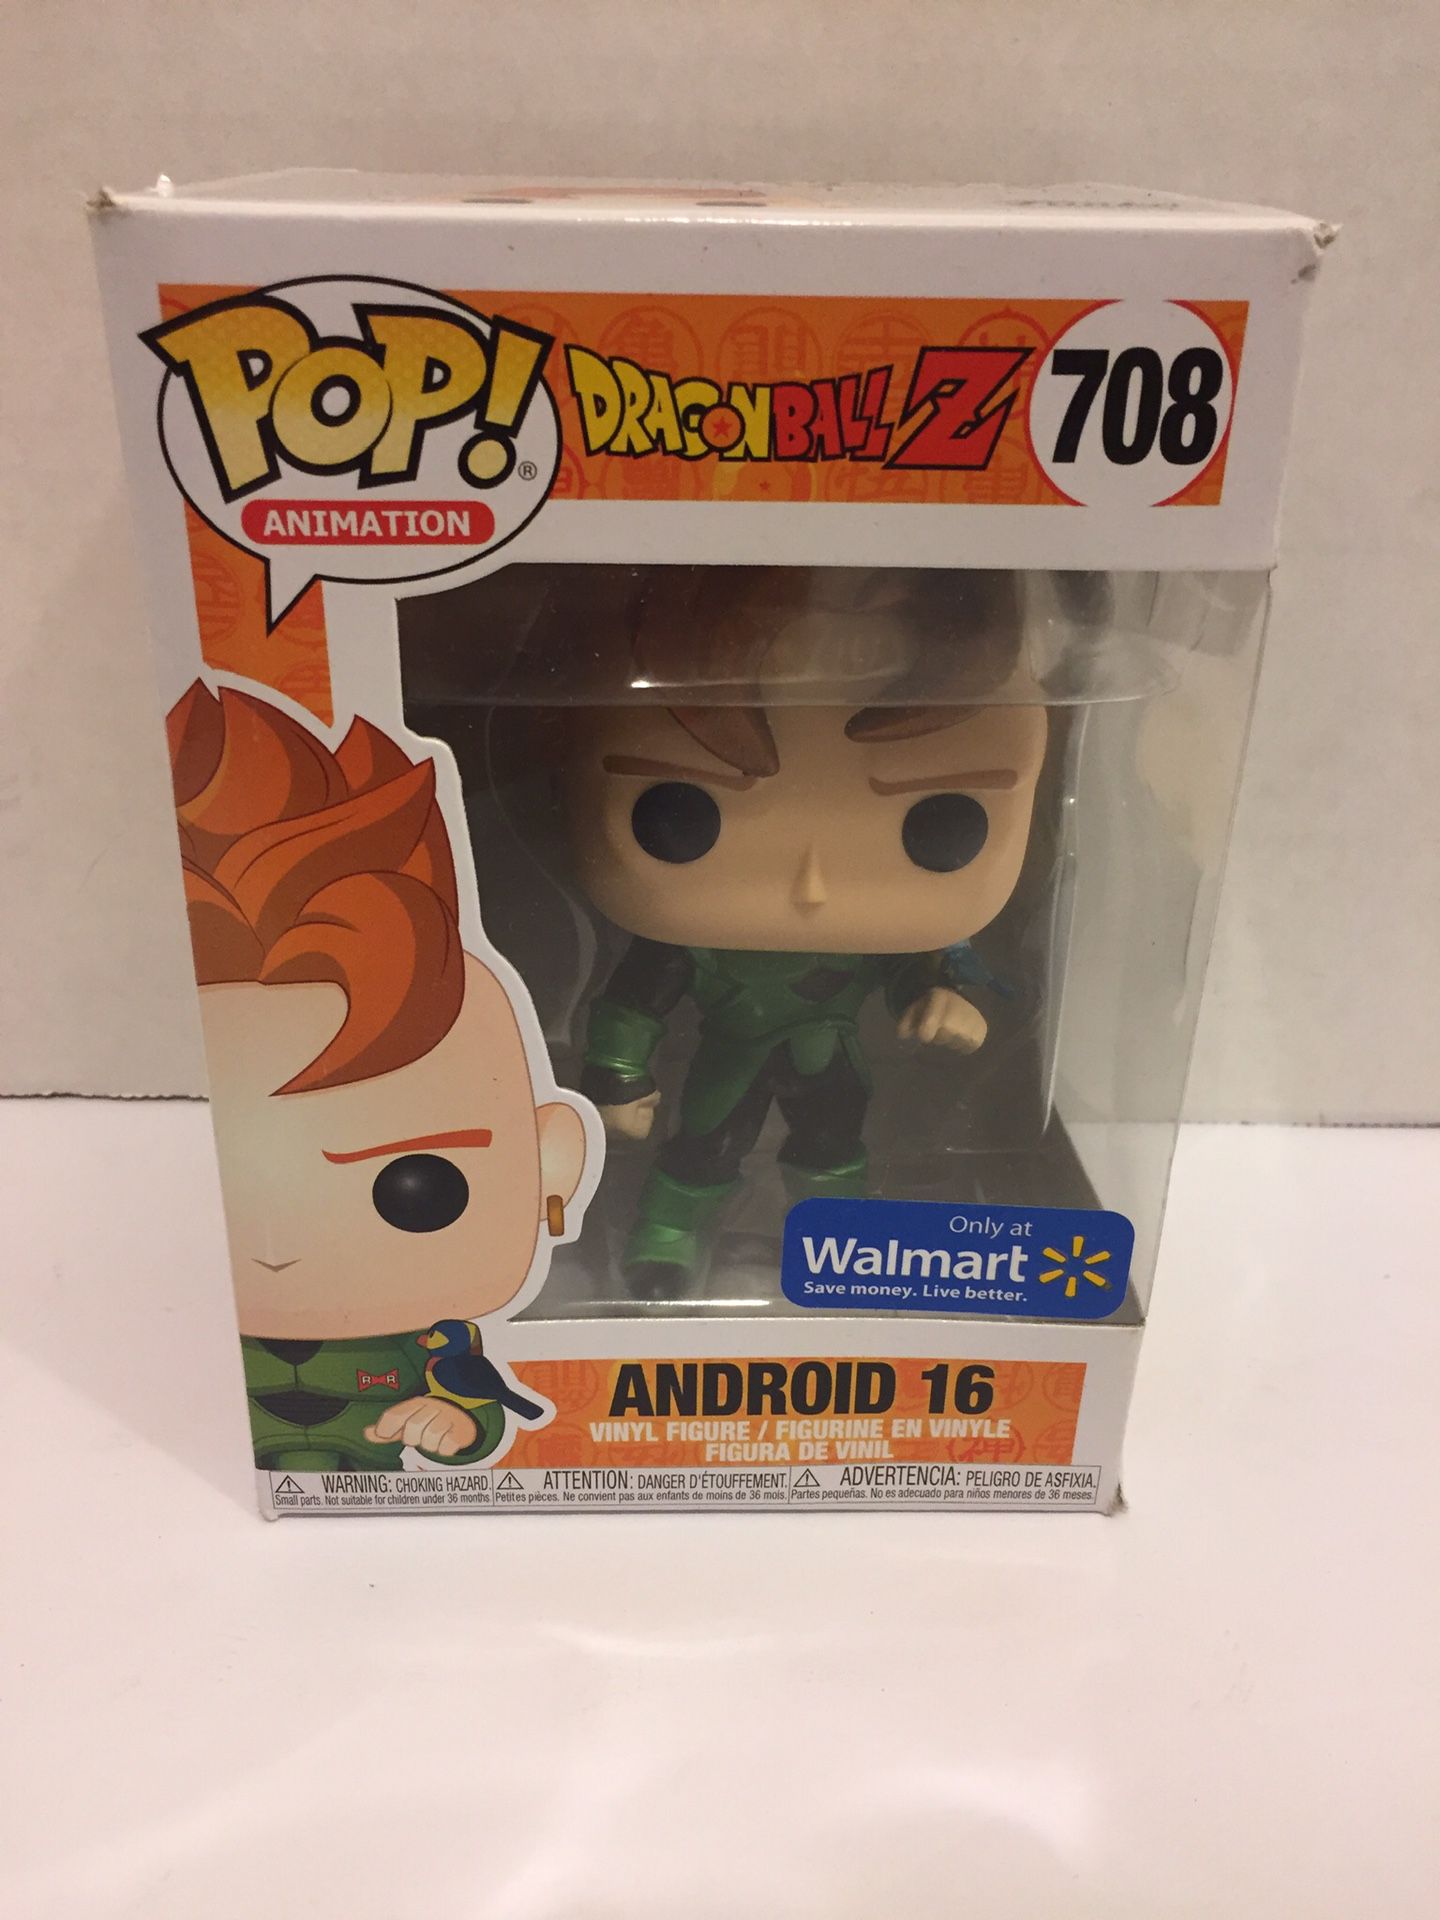 New! Android 16 Pop Animation Dragon Ball Z #708